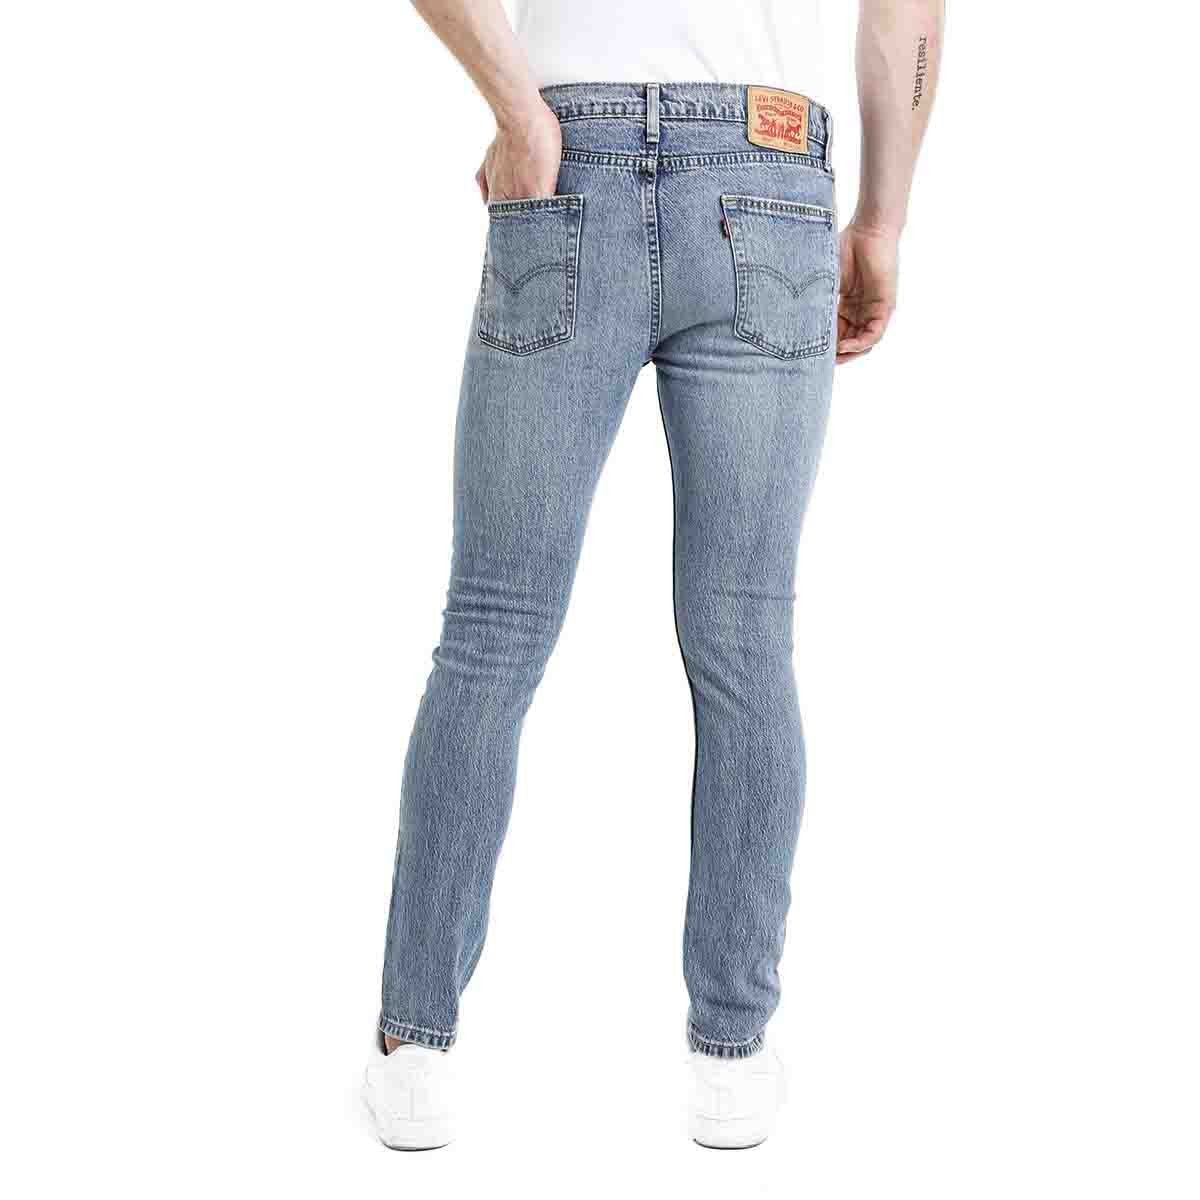 Jeans 510 Skinny Fit Levis para Caballero